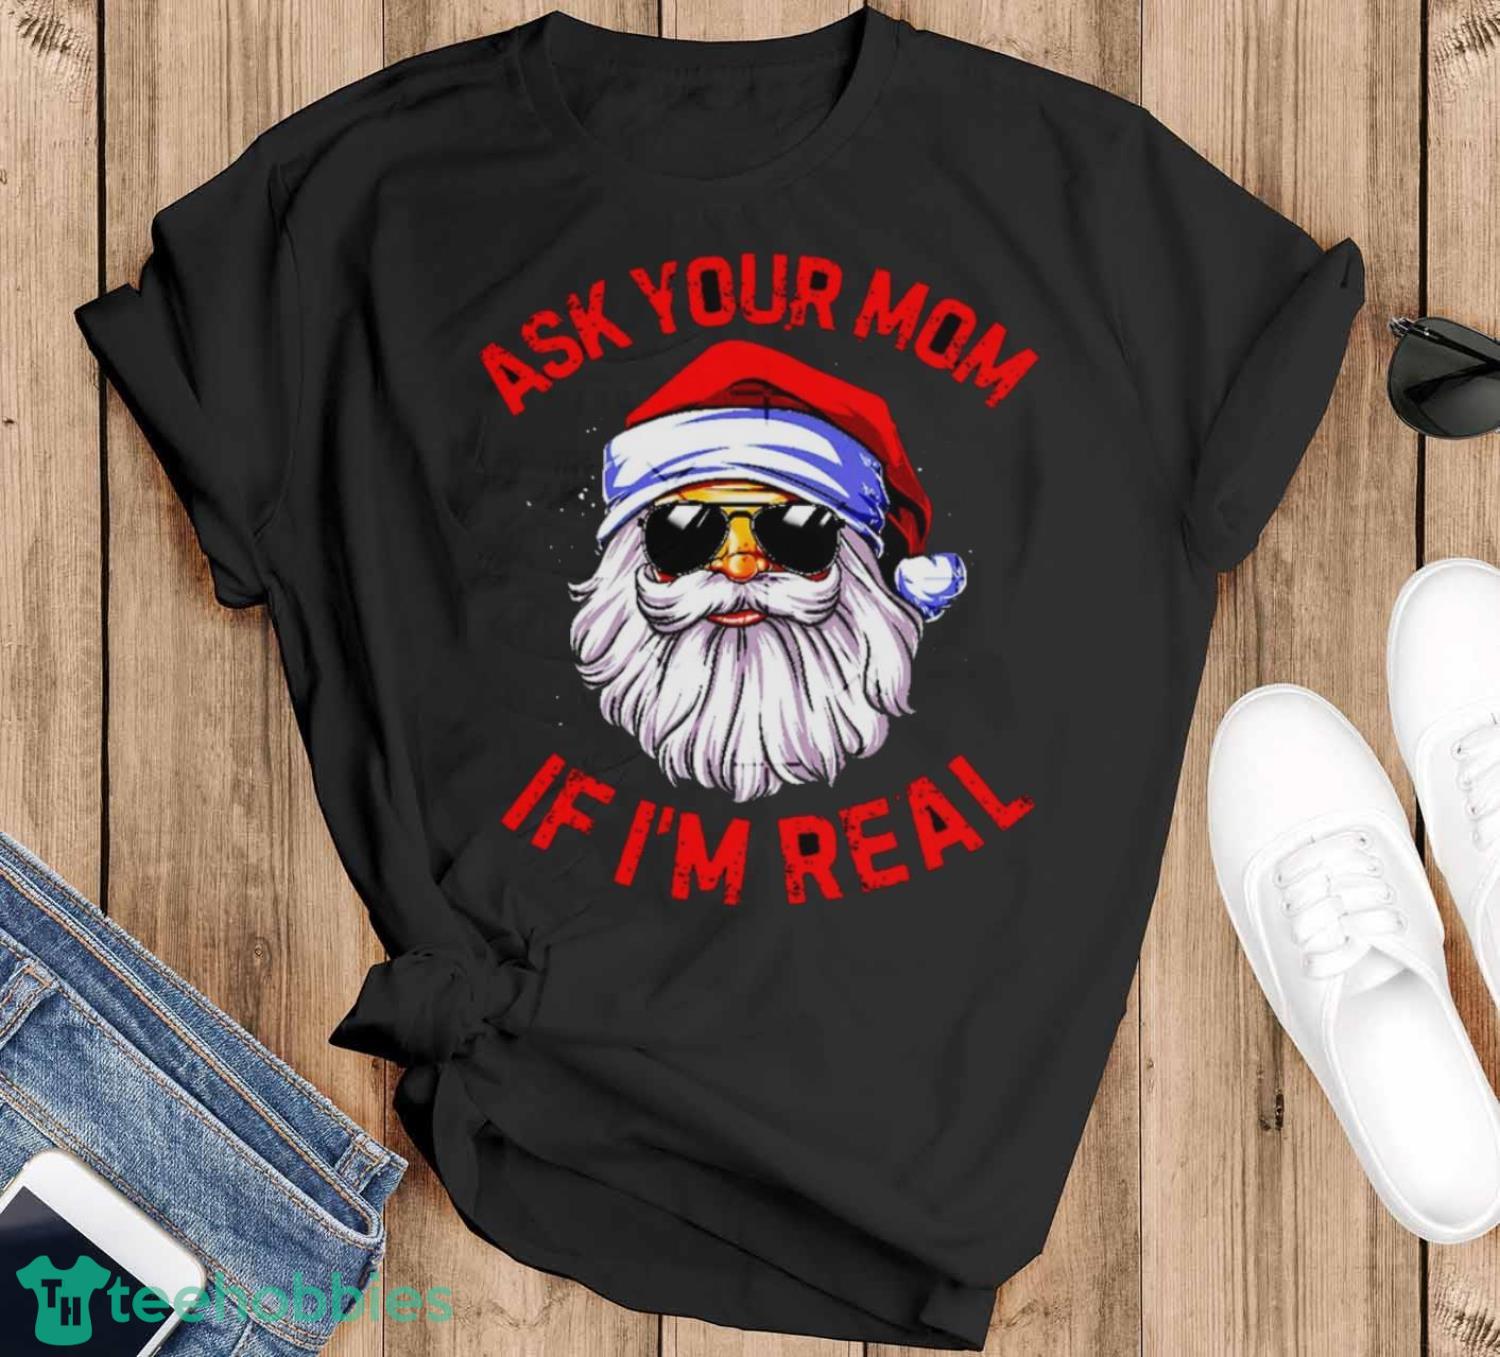 Ask Your Mom If I'M Real T-Shirts - Black T-Shirt